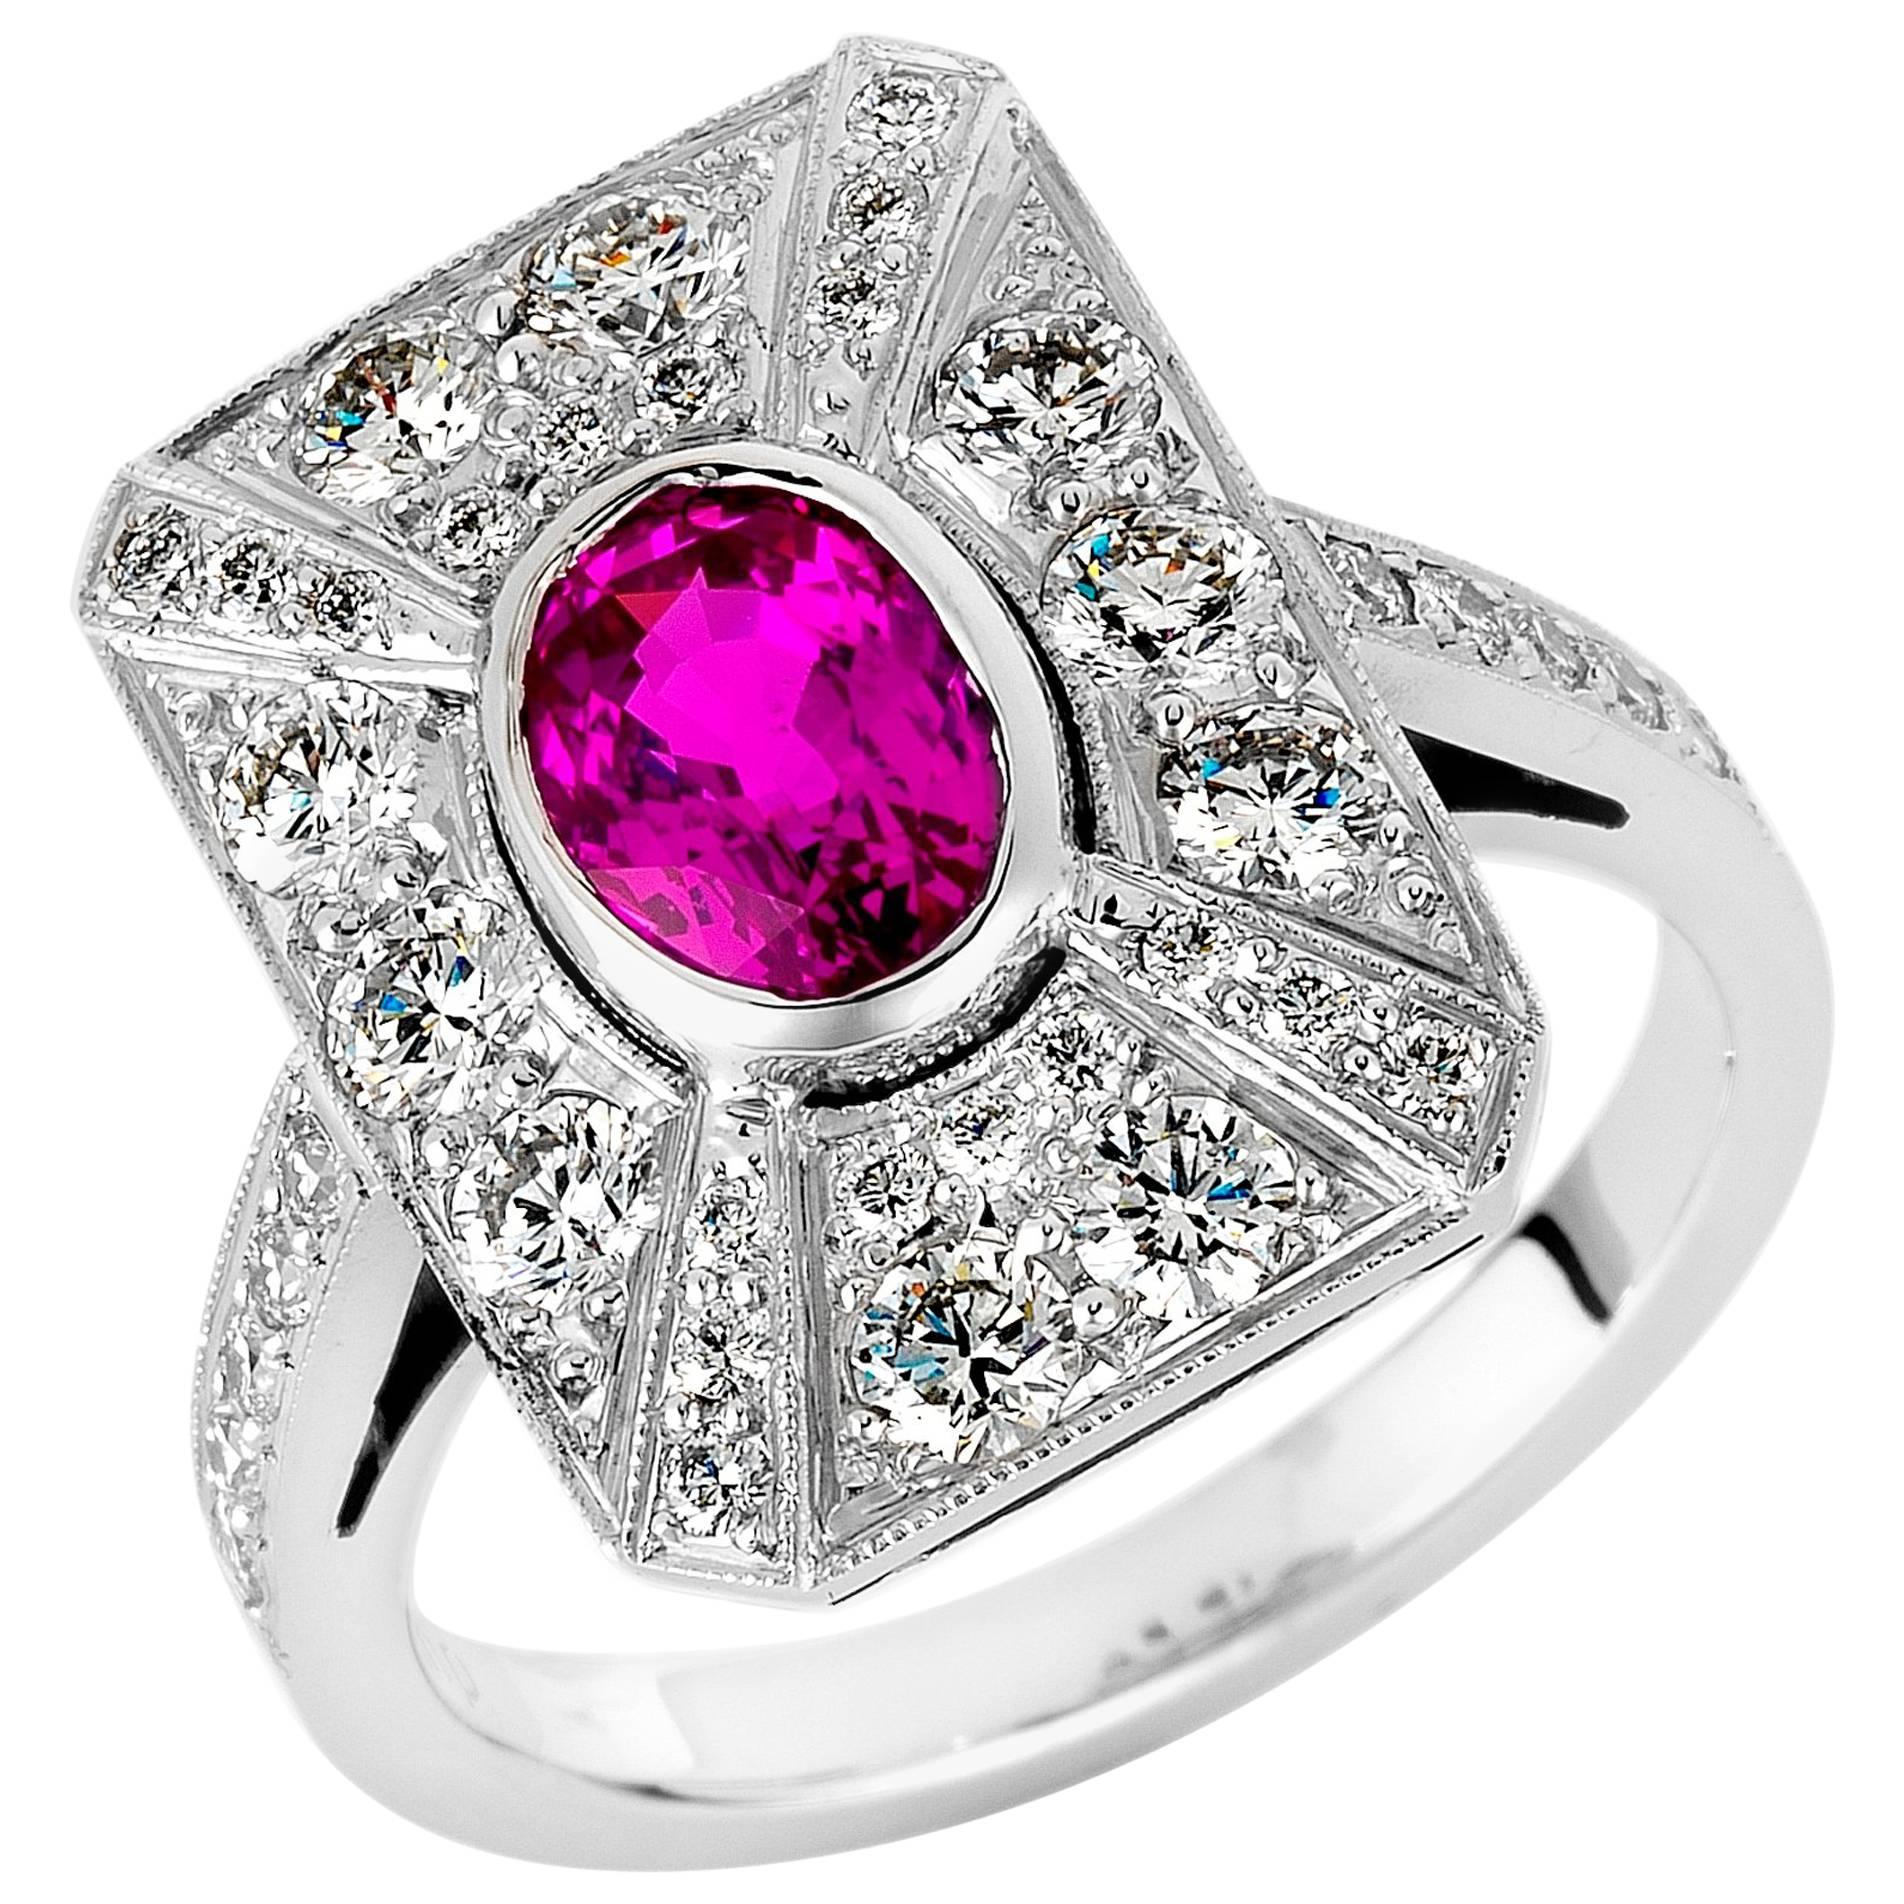 1.58 Carat Pink Sapphire Diamond Gold Ring For Sale